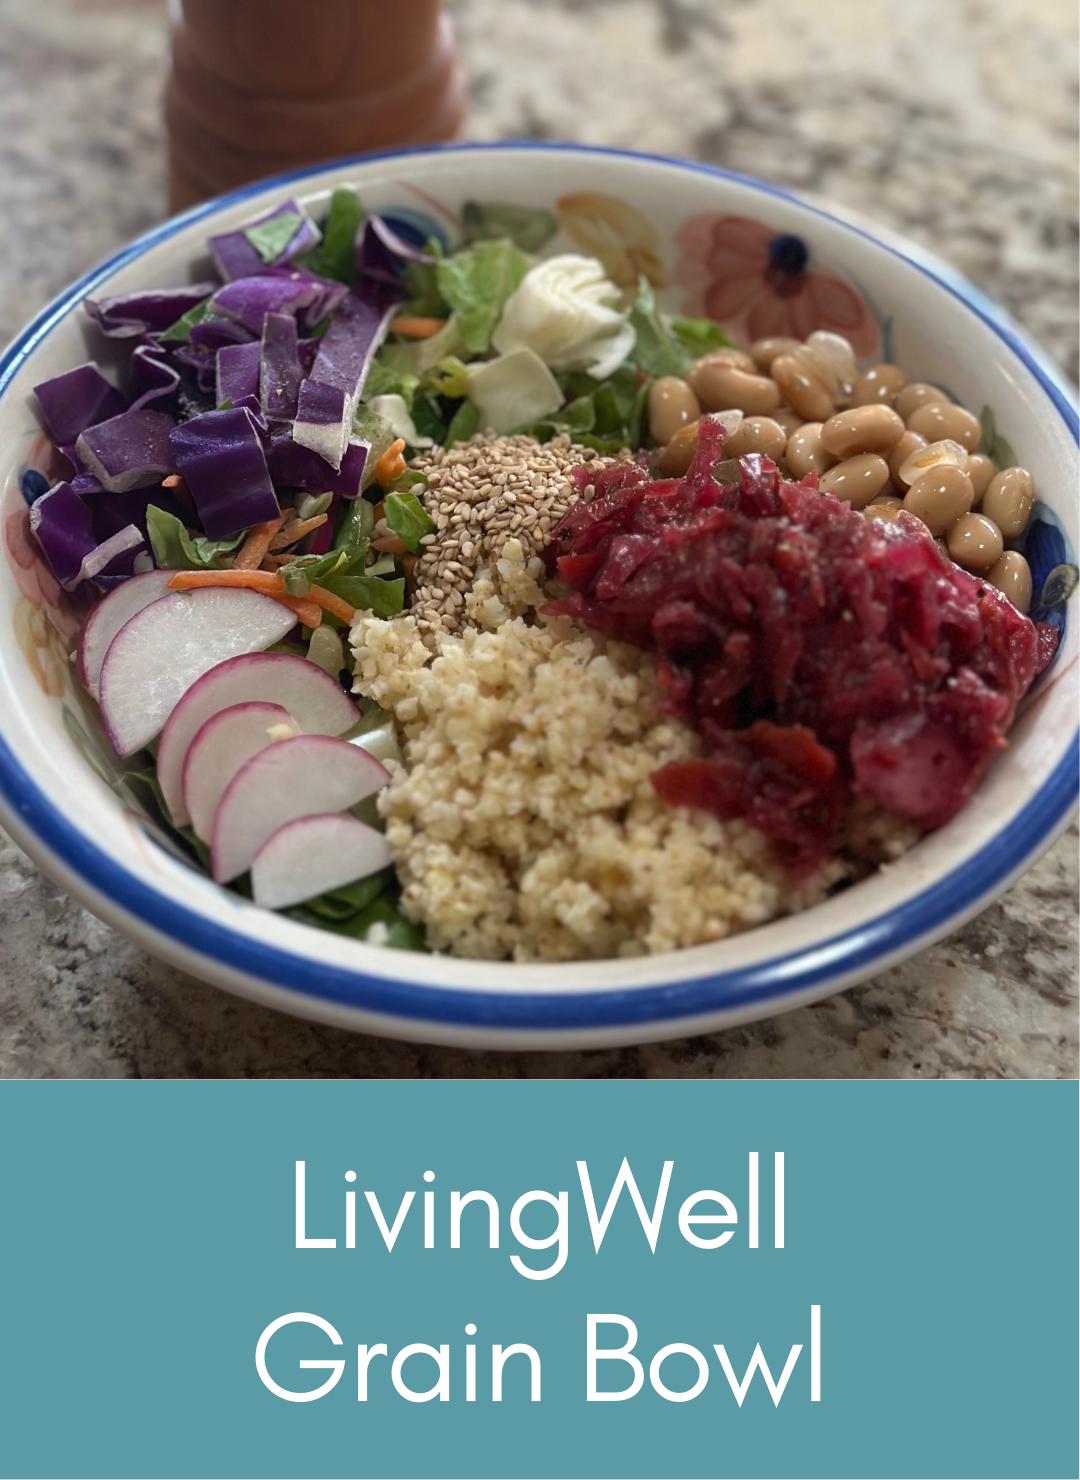 Living Well grain or buddha bowl whole food plant based Picture with link to recipe